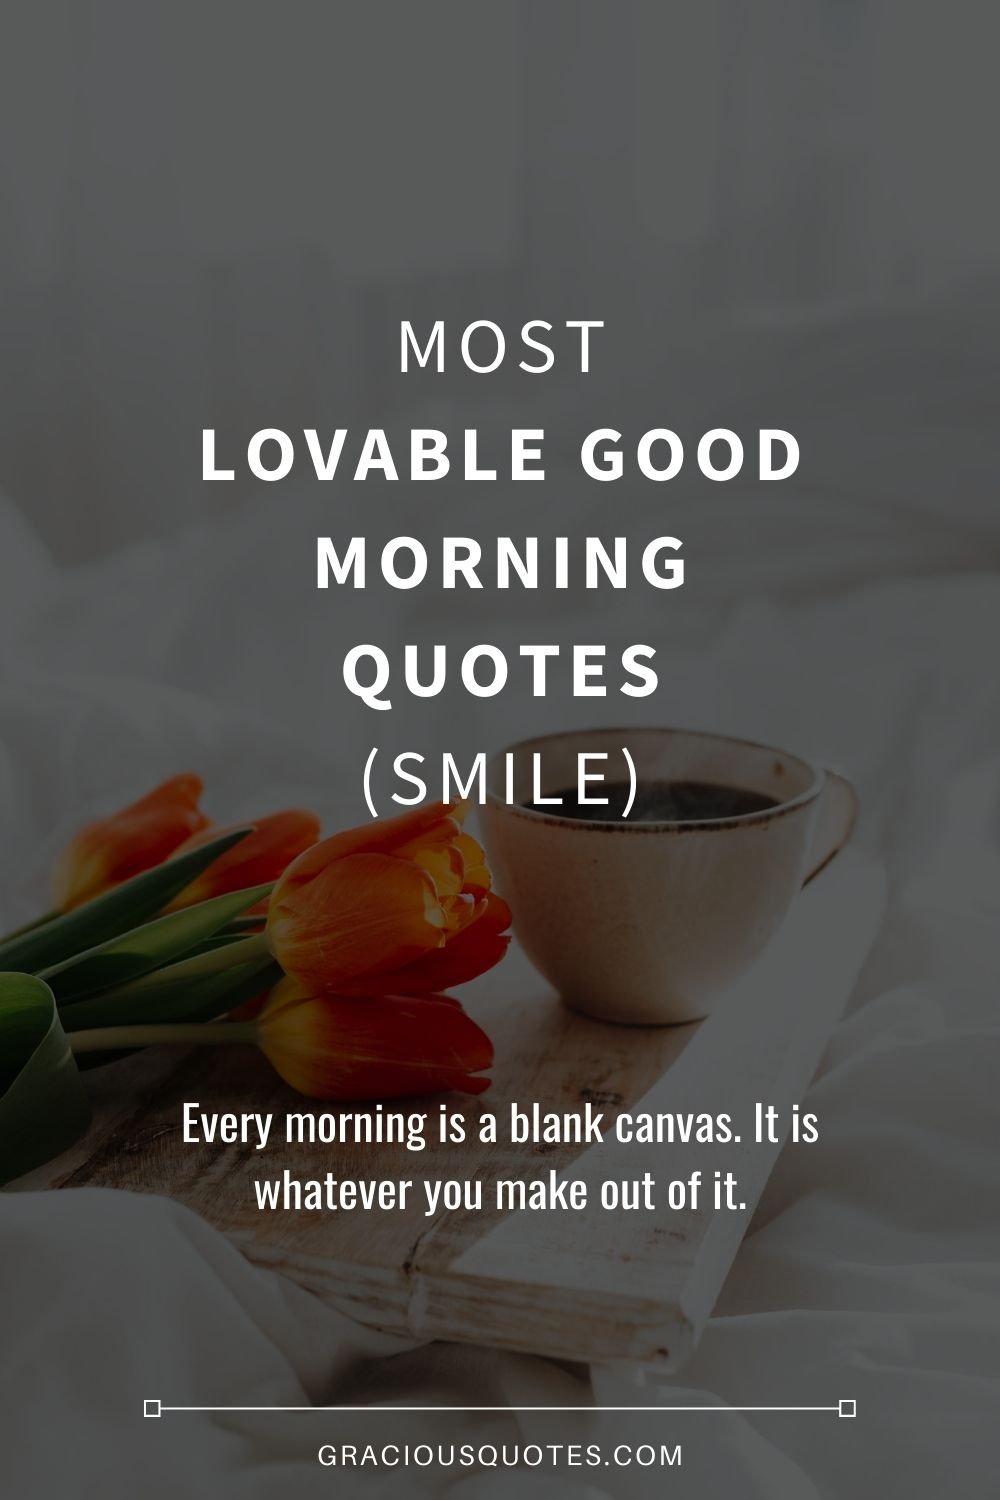 82 Most Lovable Good Morning Quotes (SMILE)